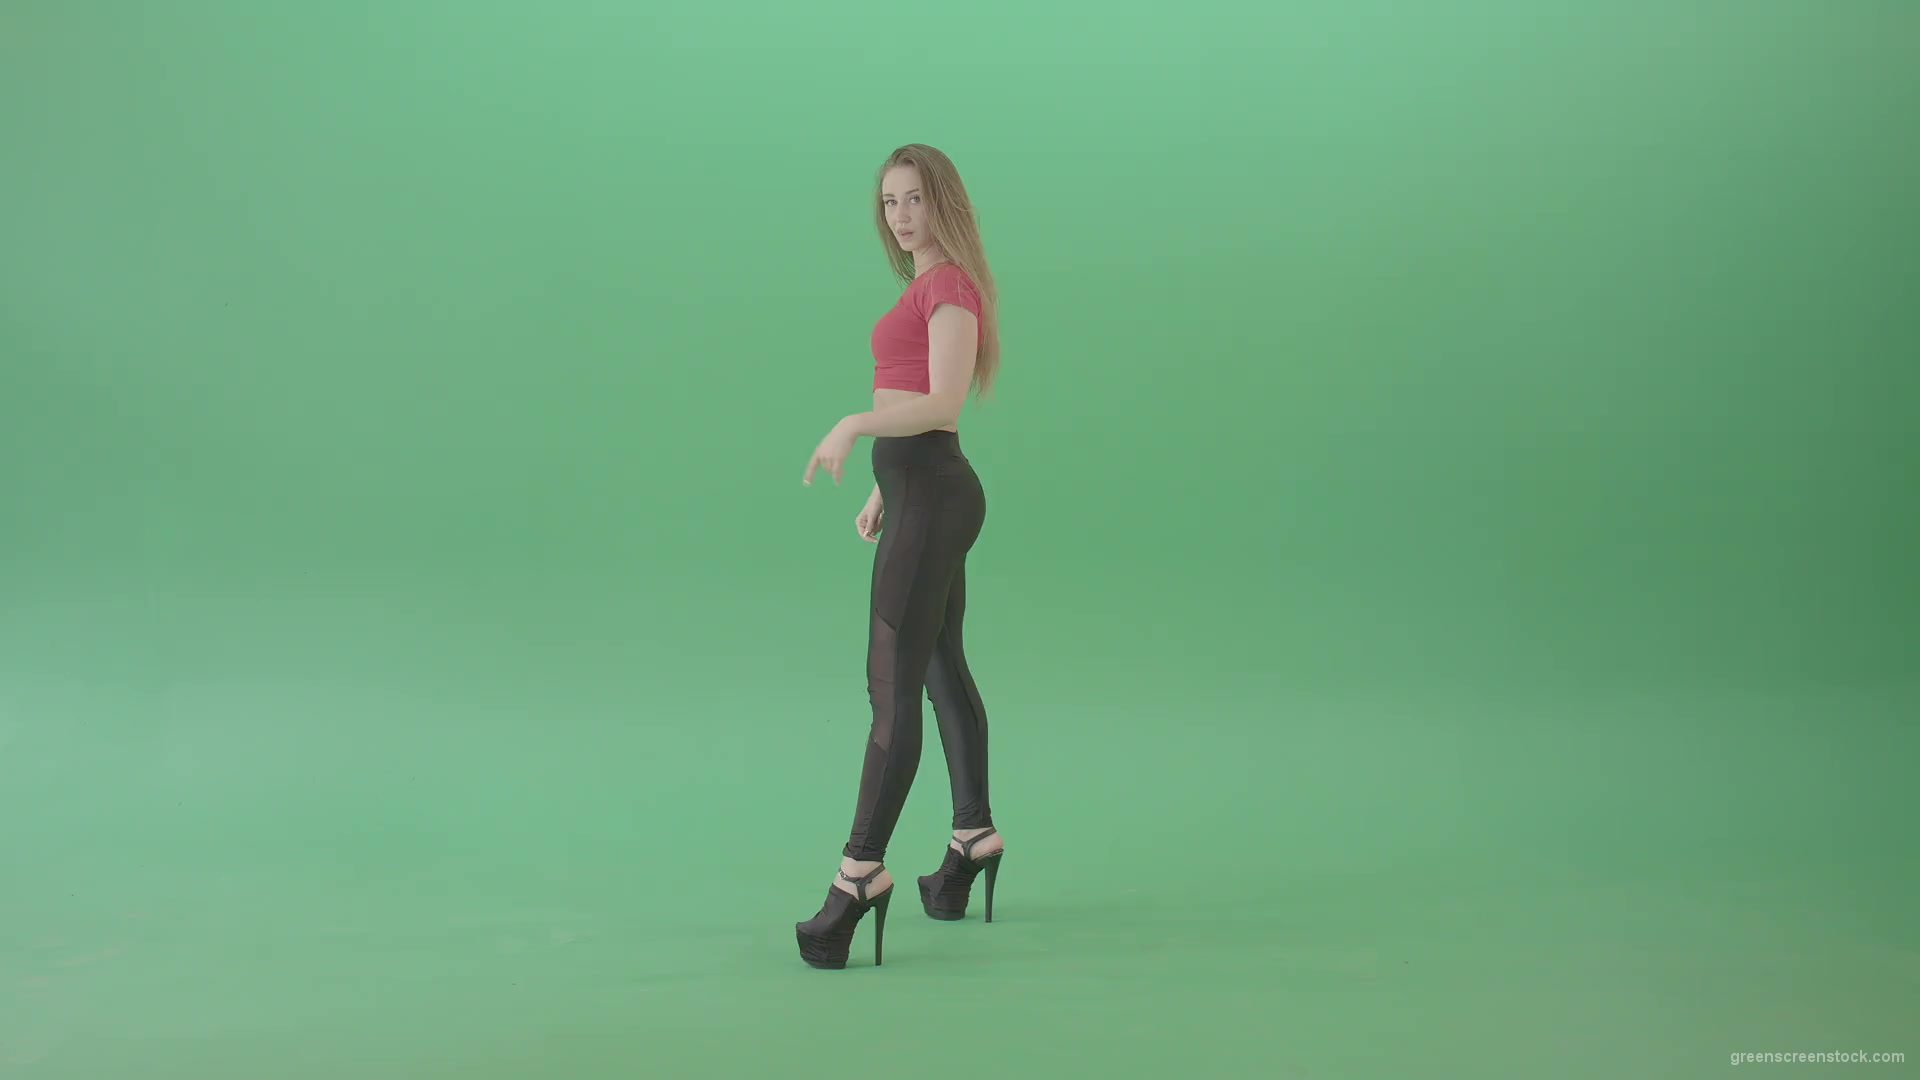 Sexy-posing-girl-showing-buts-and-dancing-on-green-screen-4K-Video-Footage-1920_001 Green Screen Stock